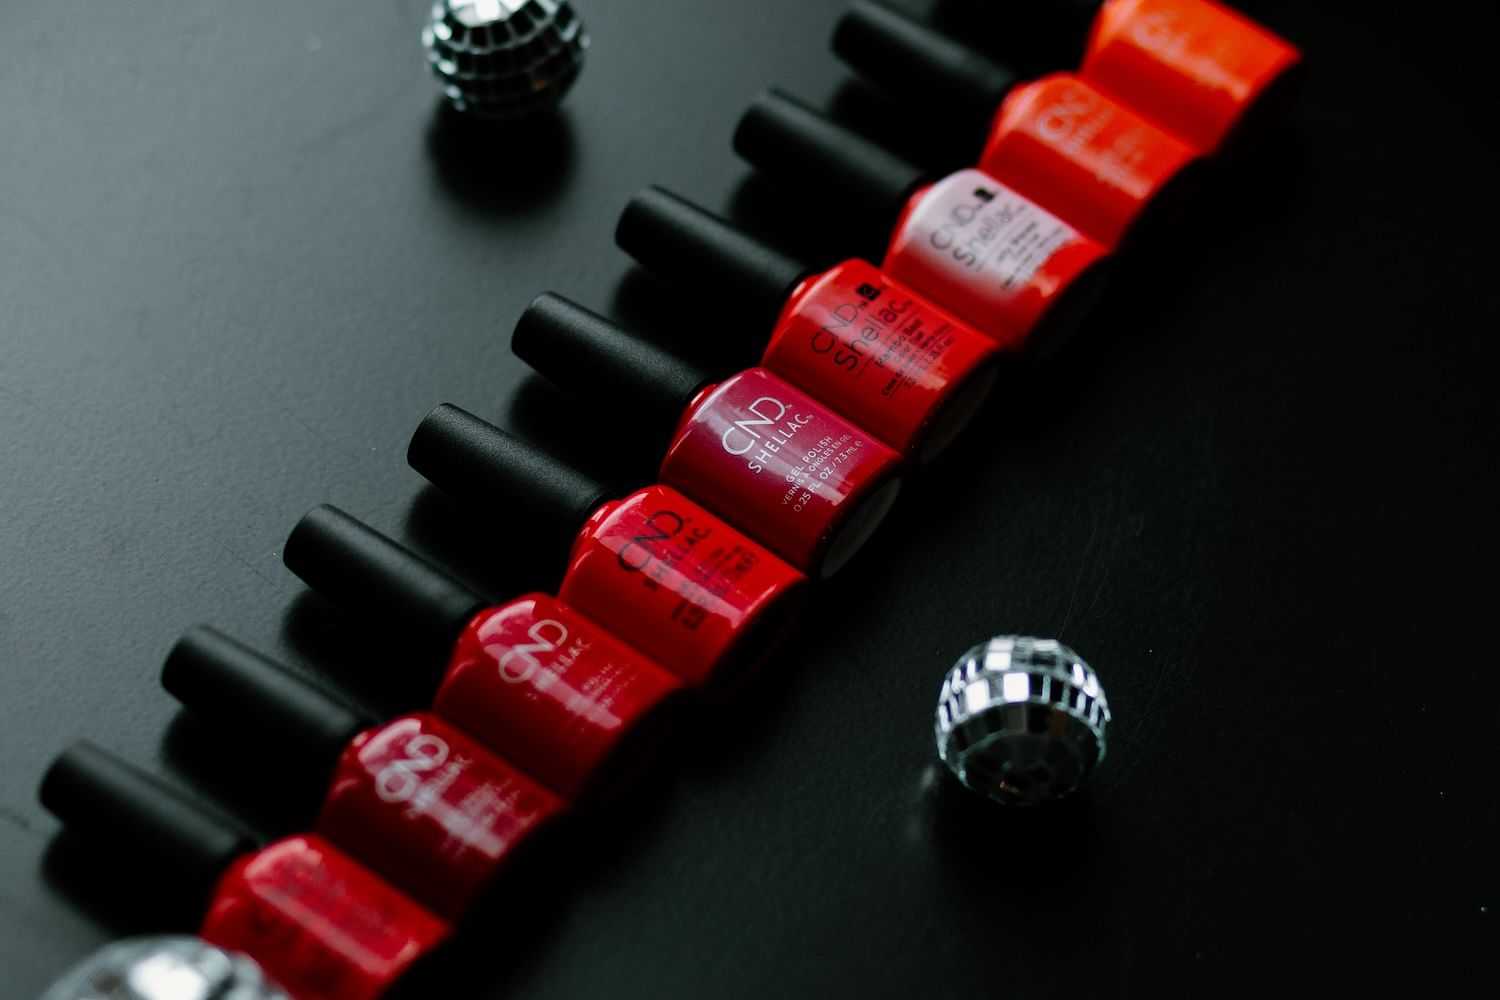 Row of red nail polish bottles on a black surface.